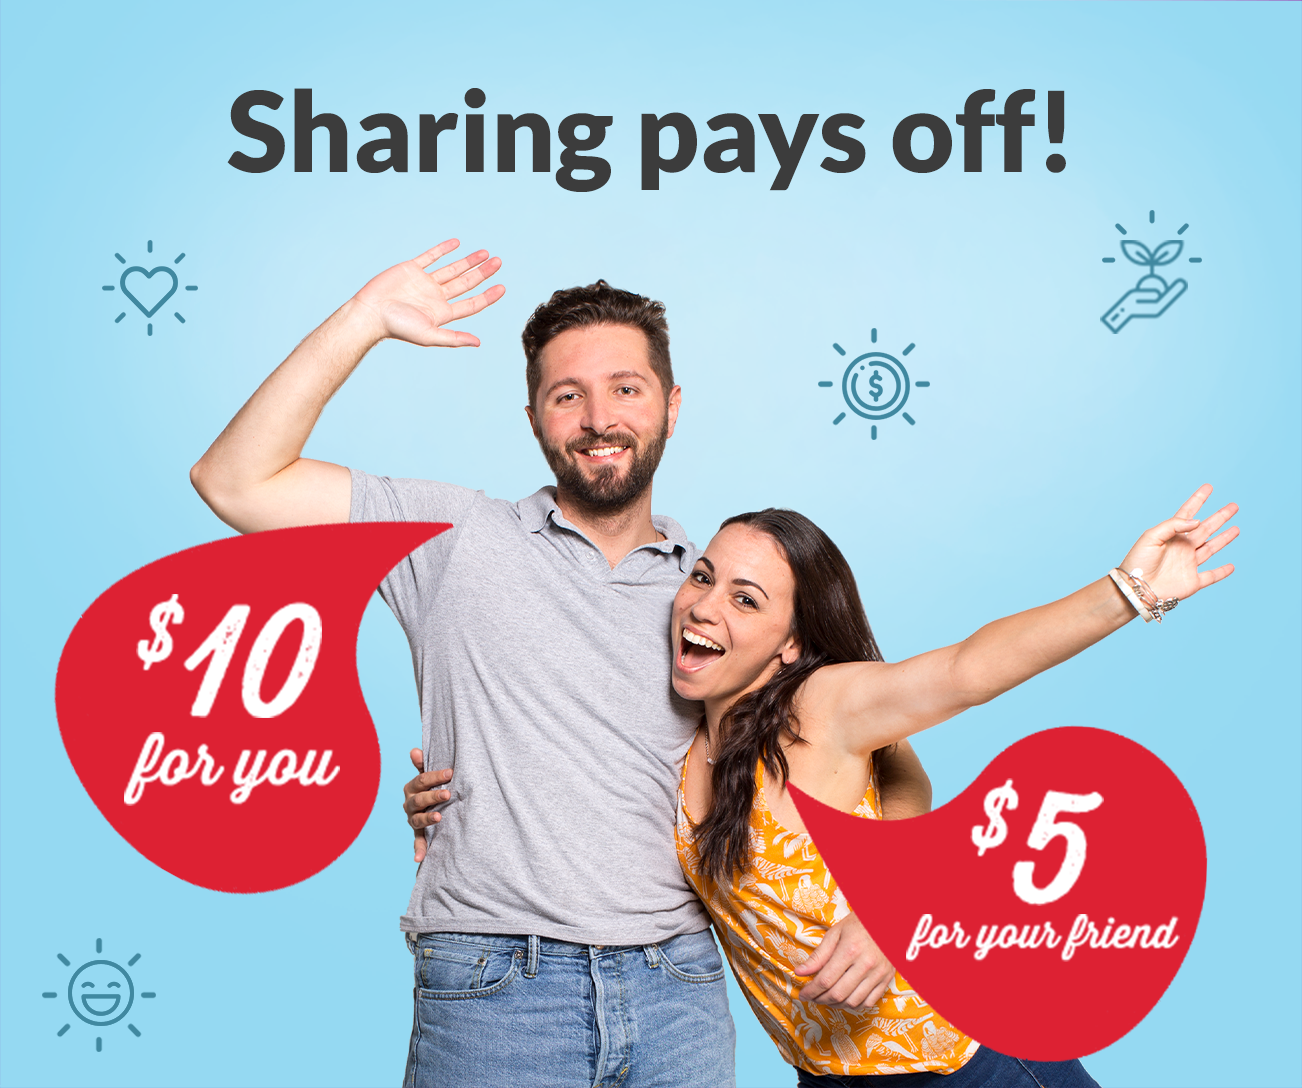 Sharing pays off! $10 for you - $5 for your friend